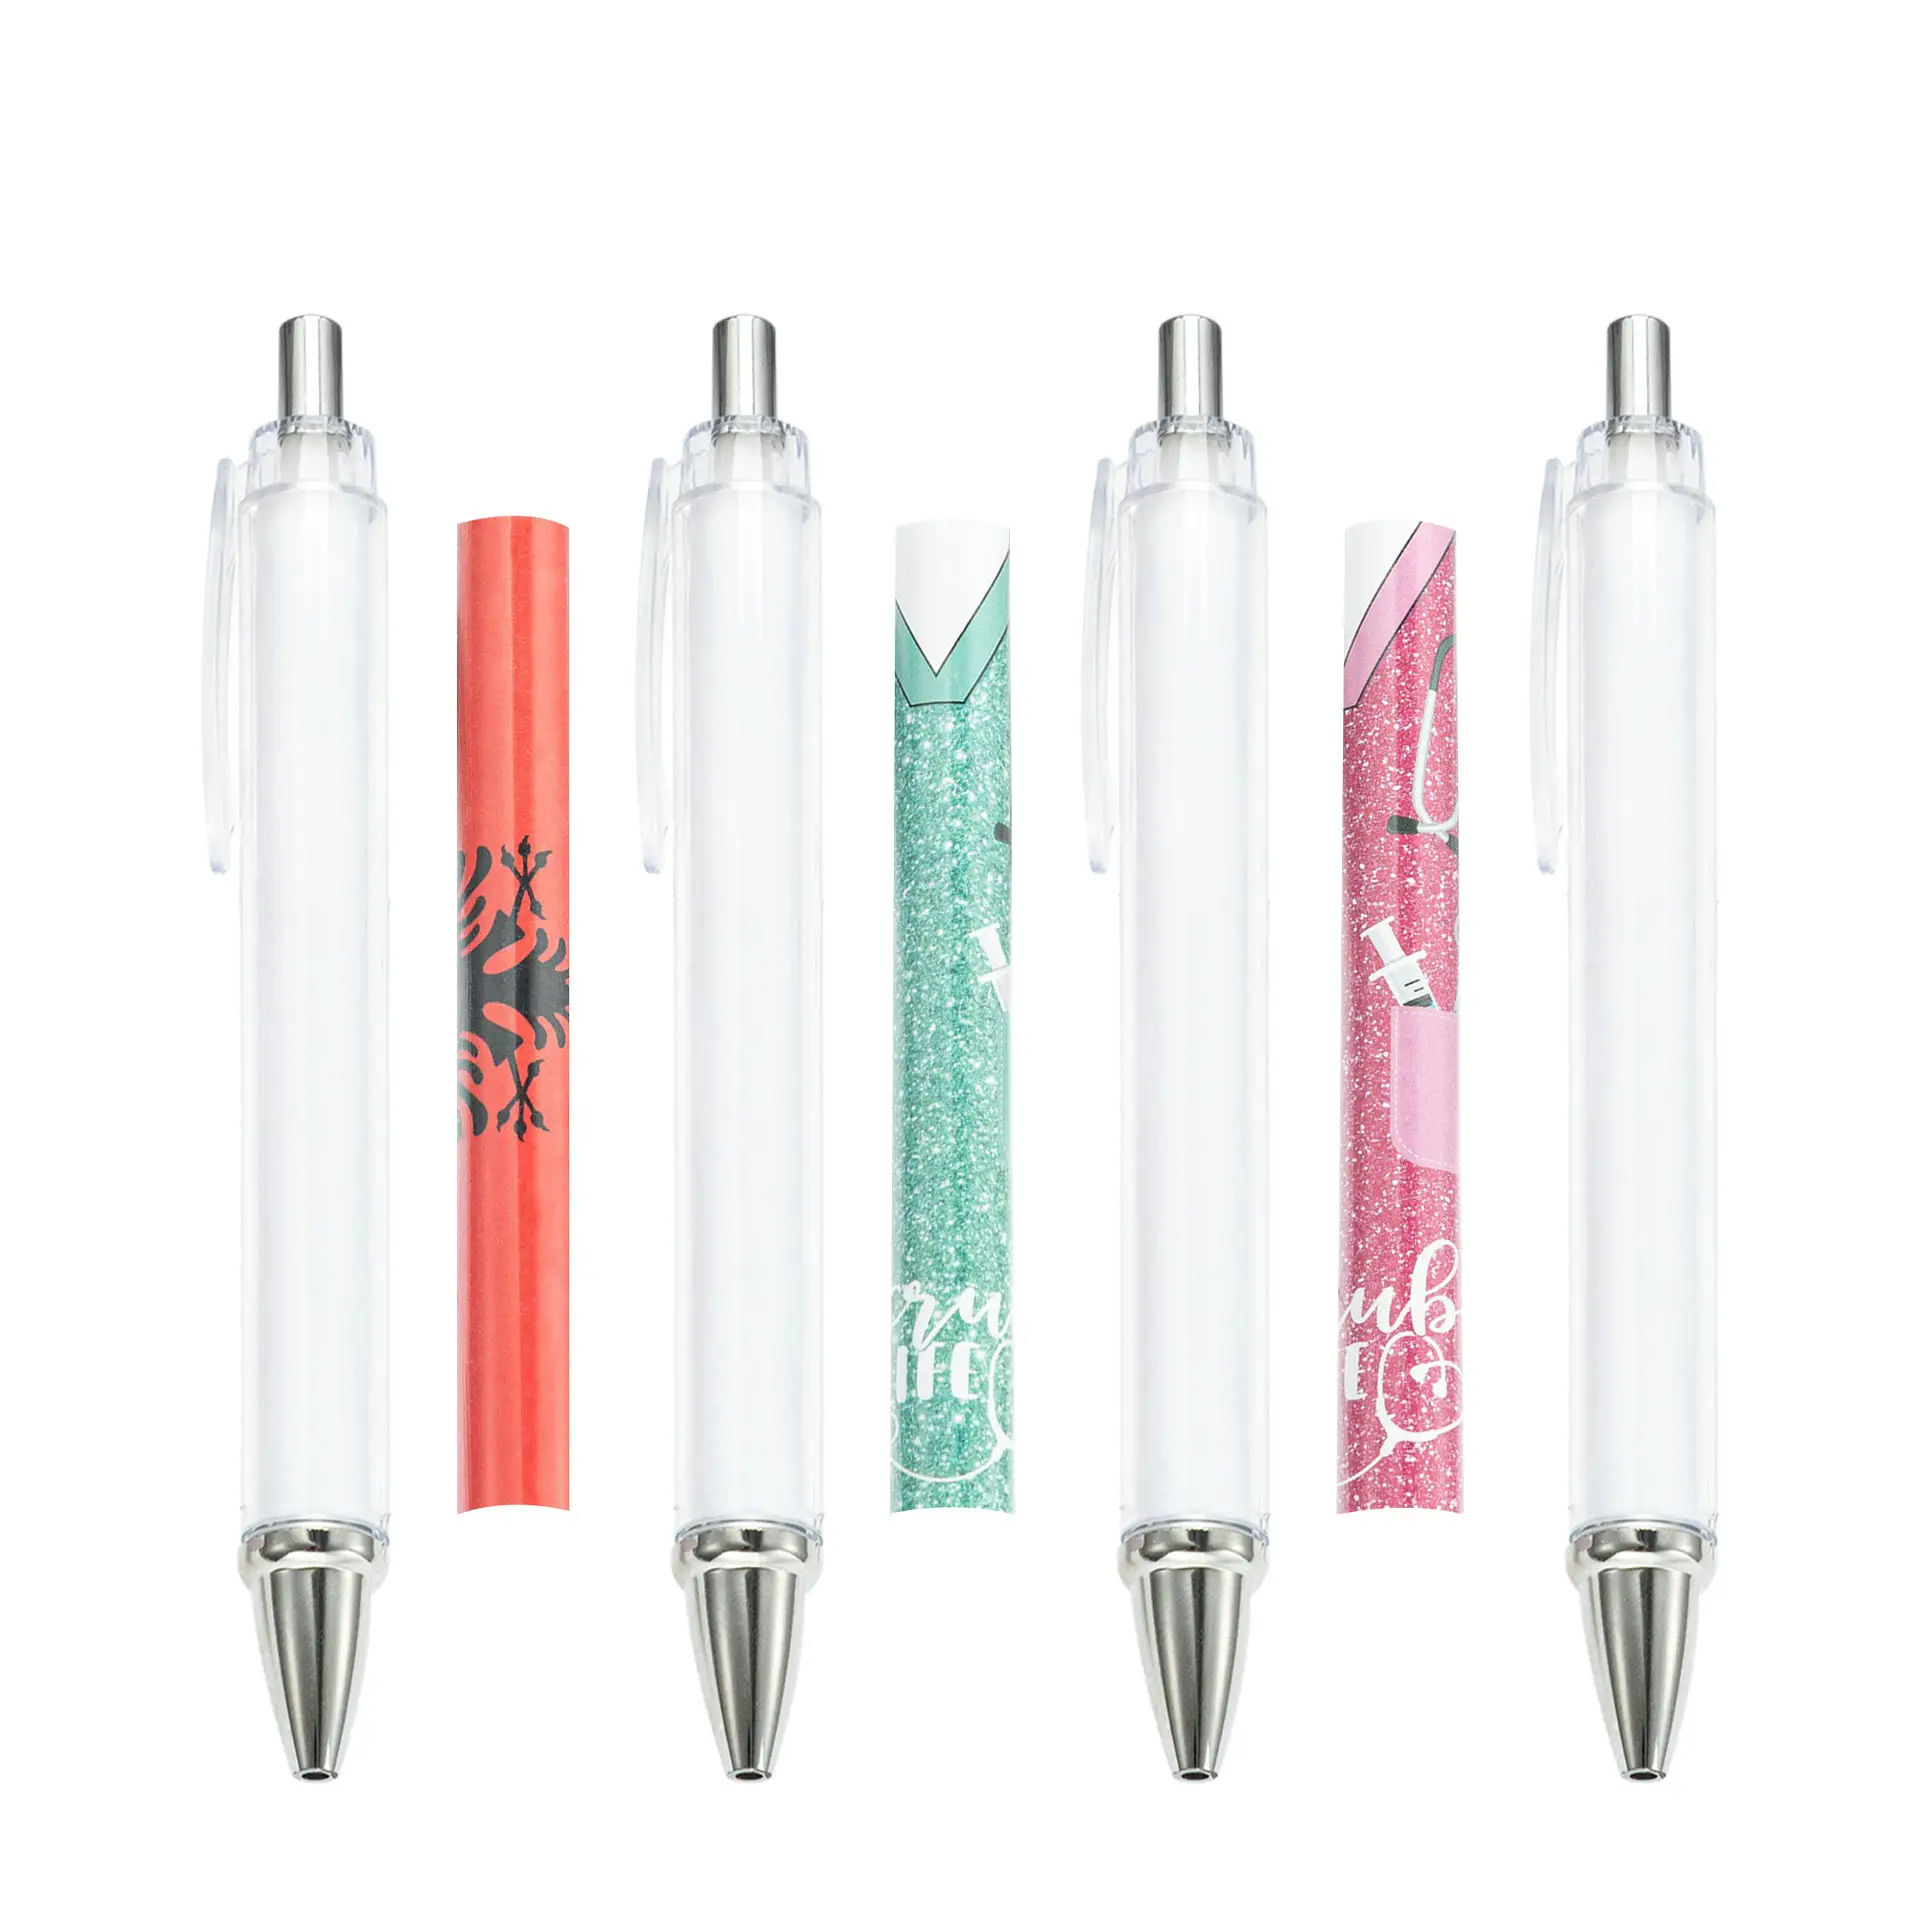 Rolling Paper Picture Insert DIY Plastic Click Hotel Pen Cartoon Idols Transparent White Pen Cheating Gadgets for Exam